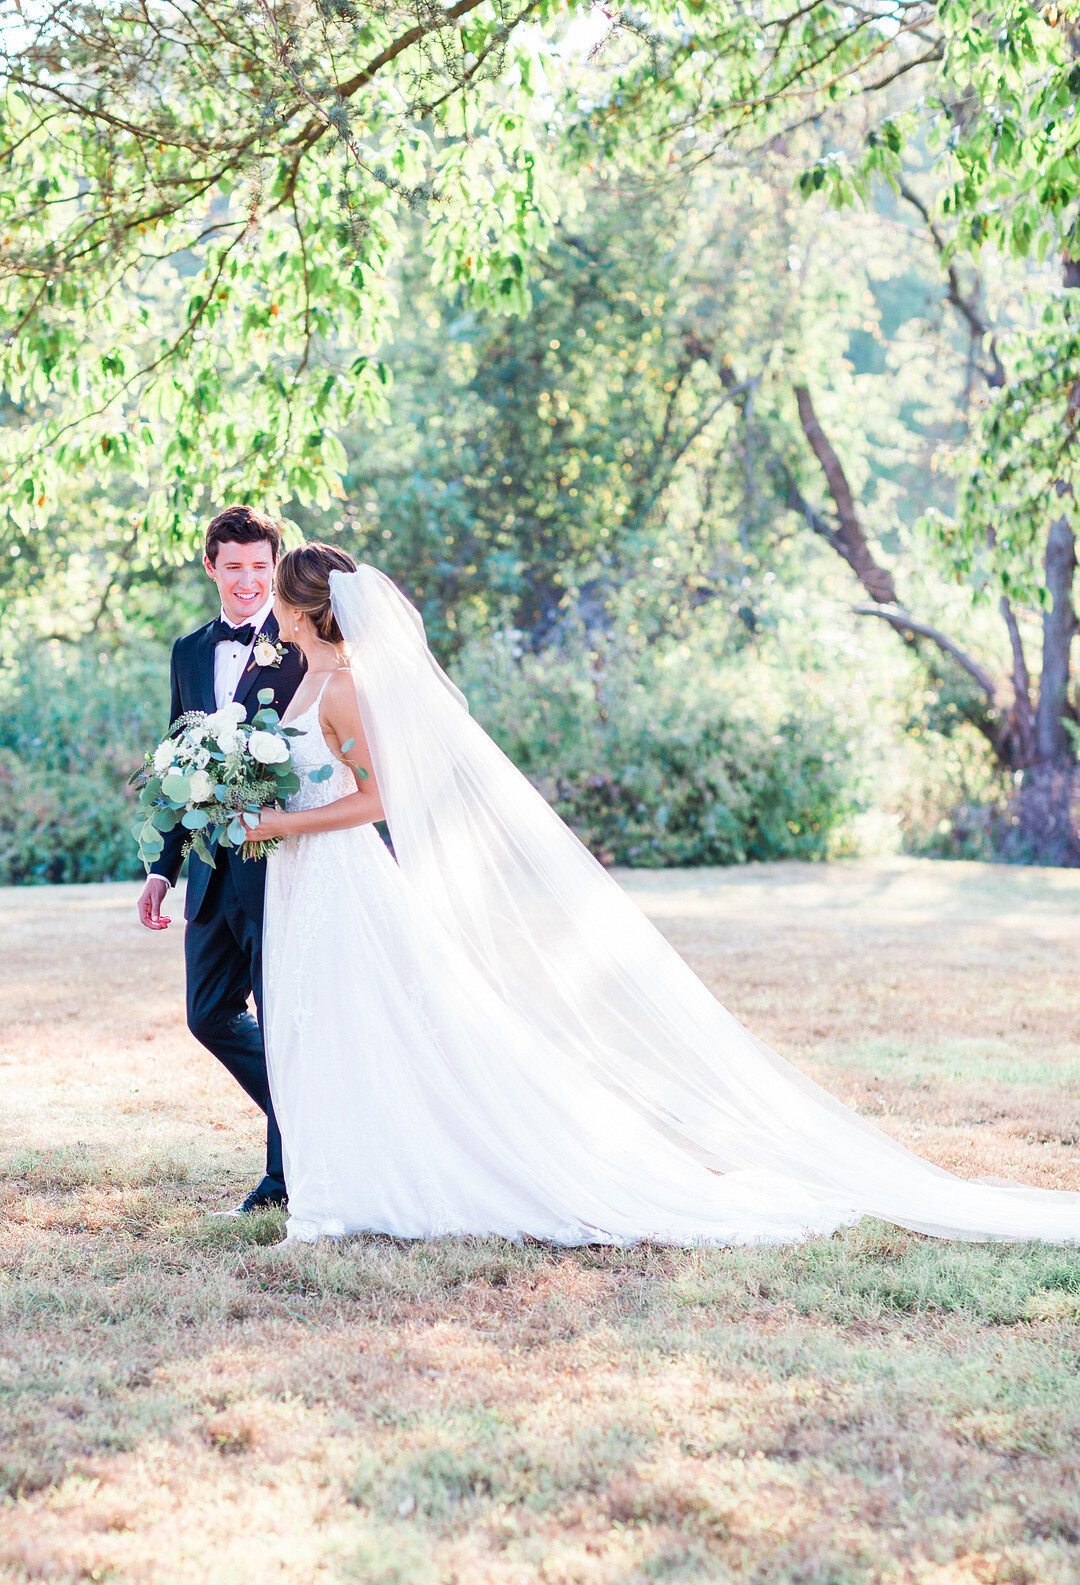 Abby and Ryan's Eco-Friendly Estate Wedding in Chadds Ford, Pennsylvania